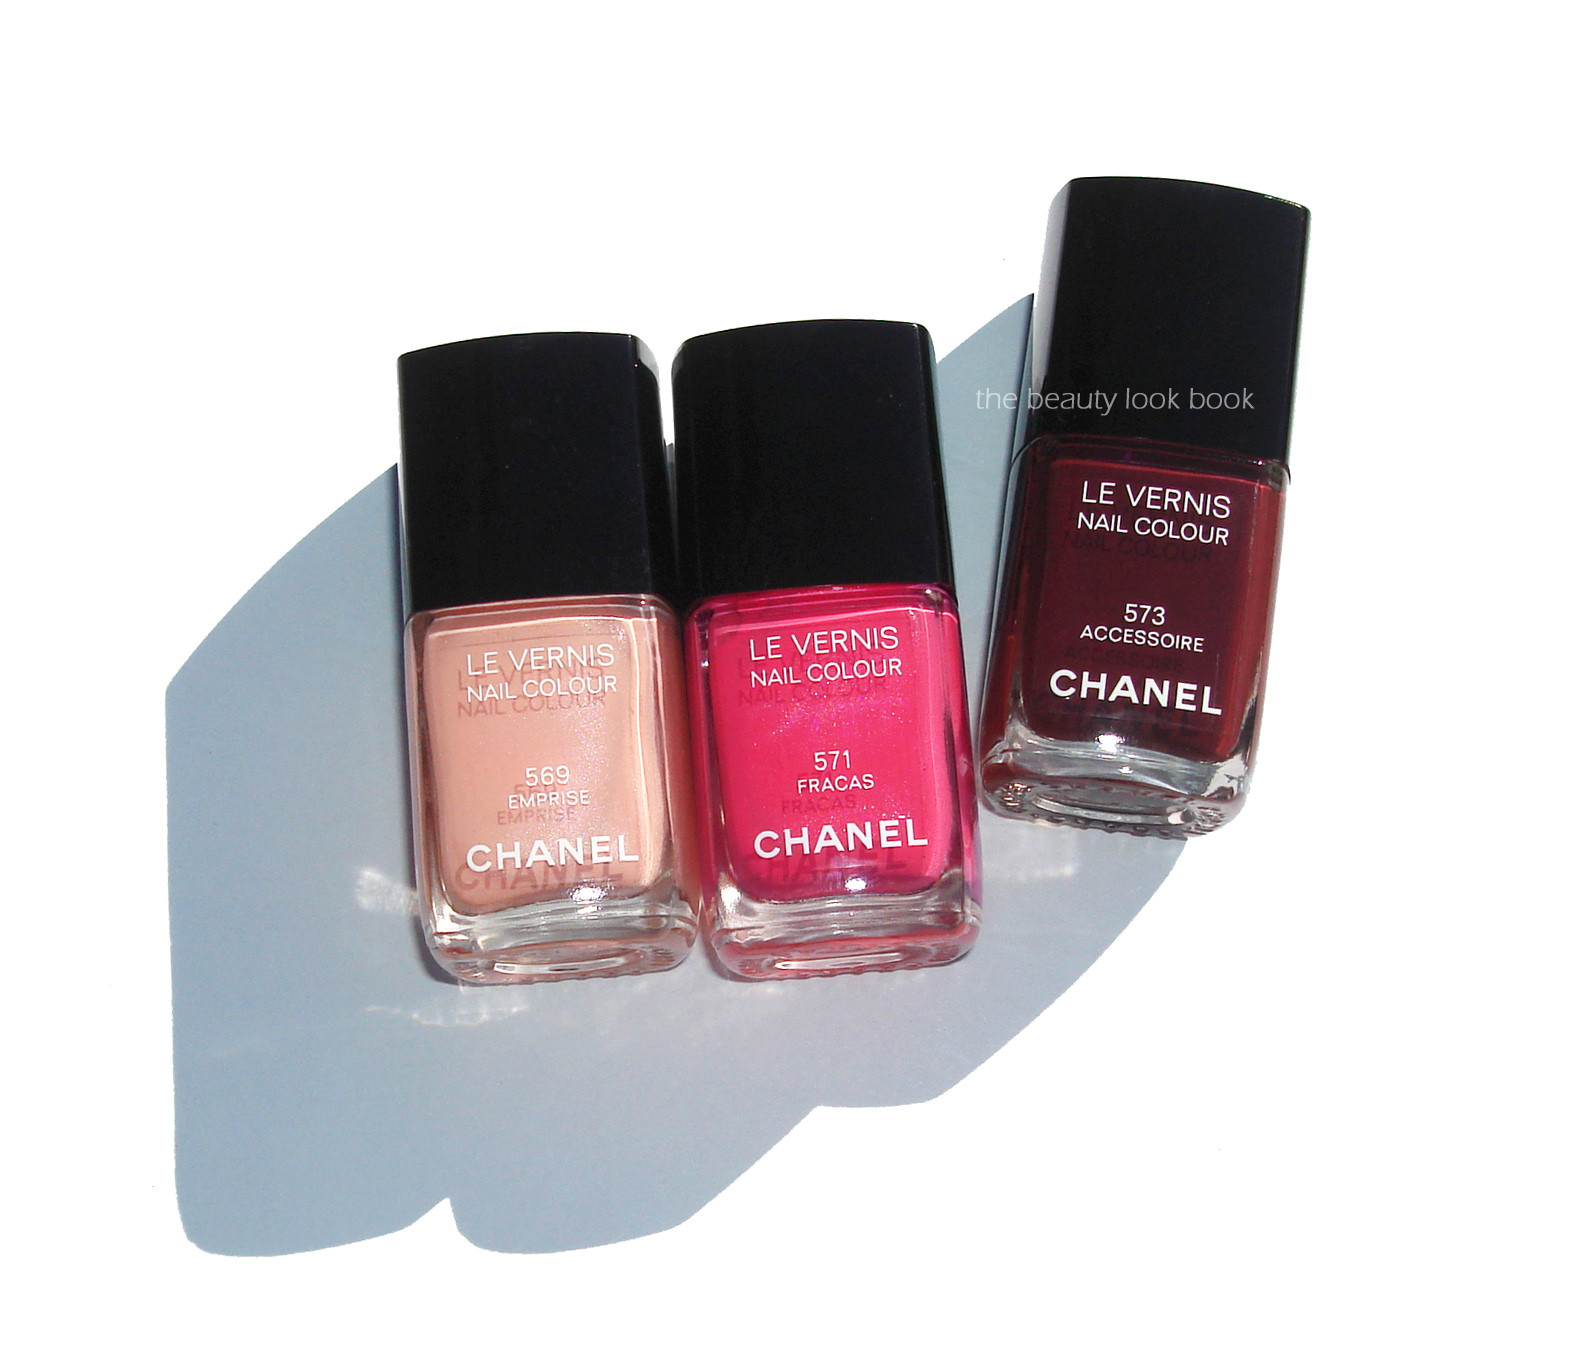 sikkerhed Precipice sprogfærdighed Chanel Emprise, Fracas and Accessoire Le Vernis for Spring 2013 - The  Beauty Look Book